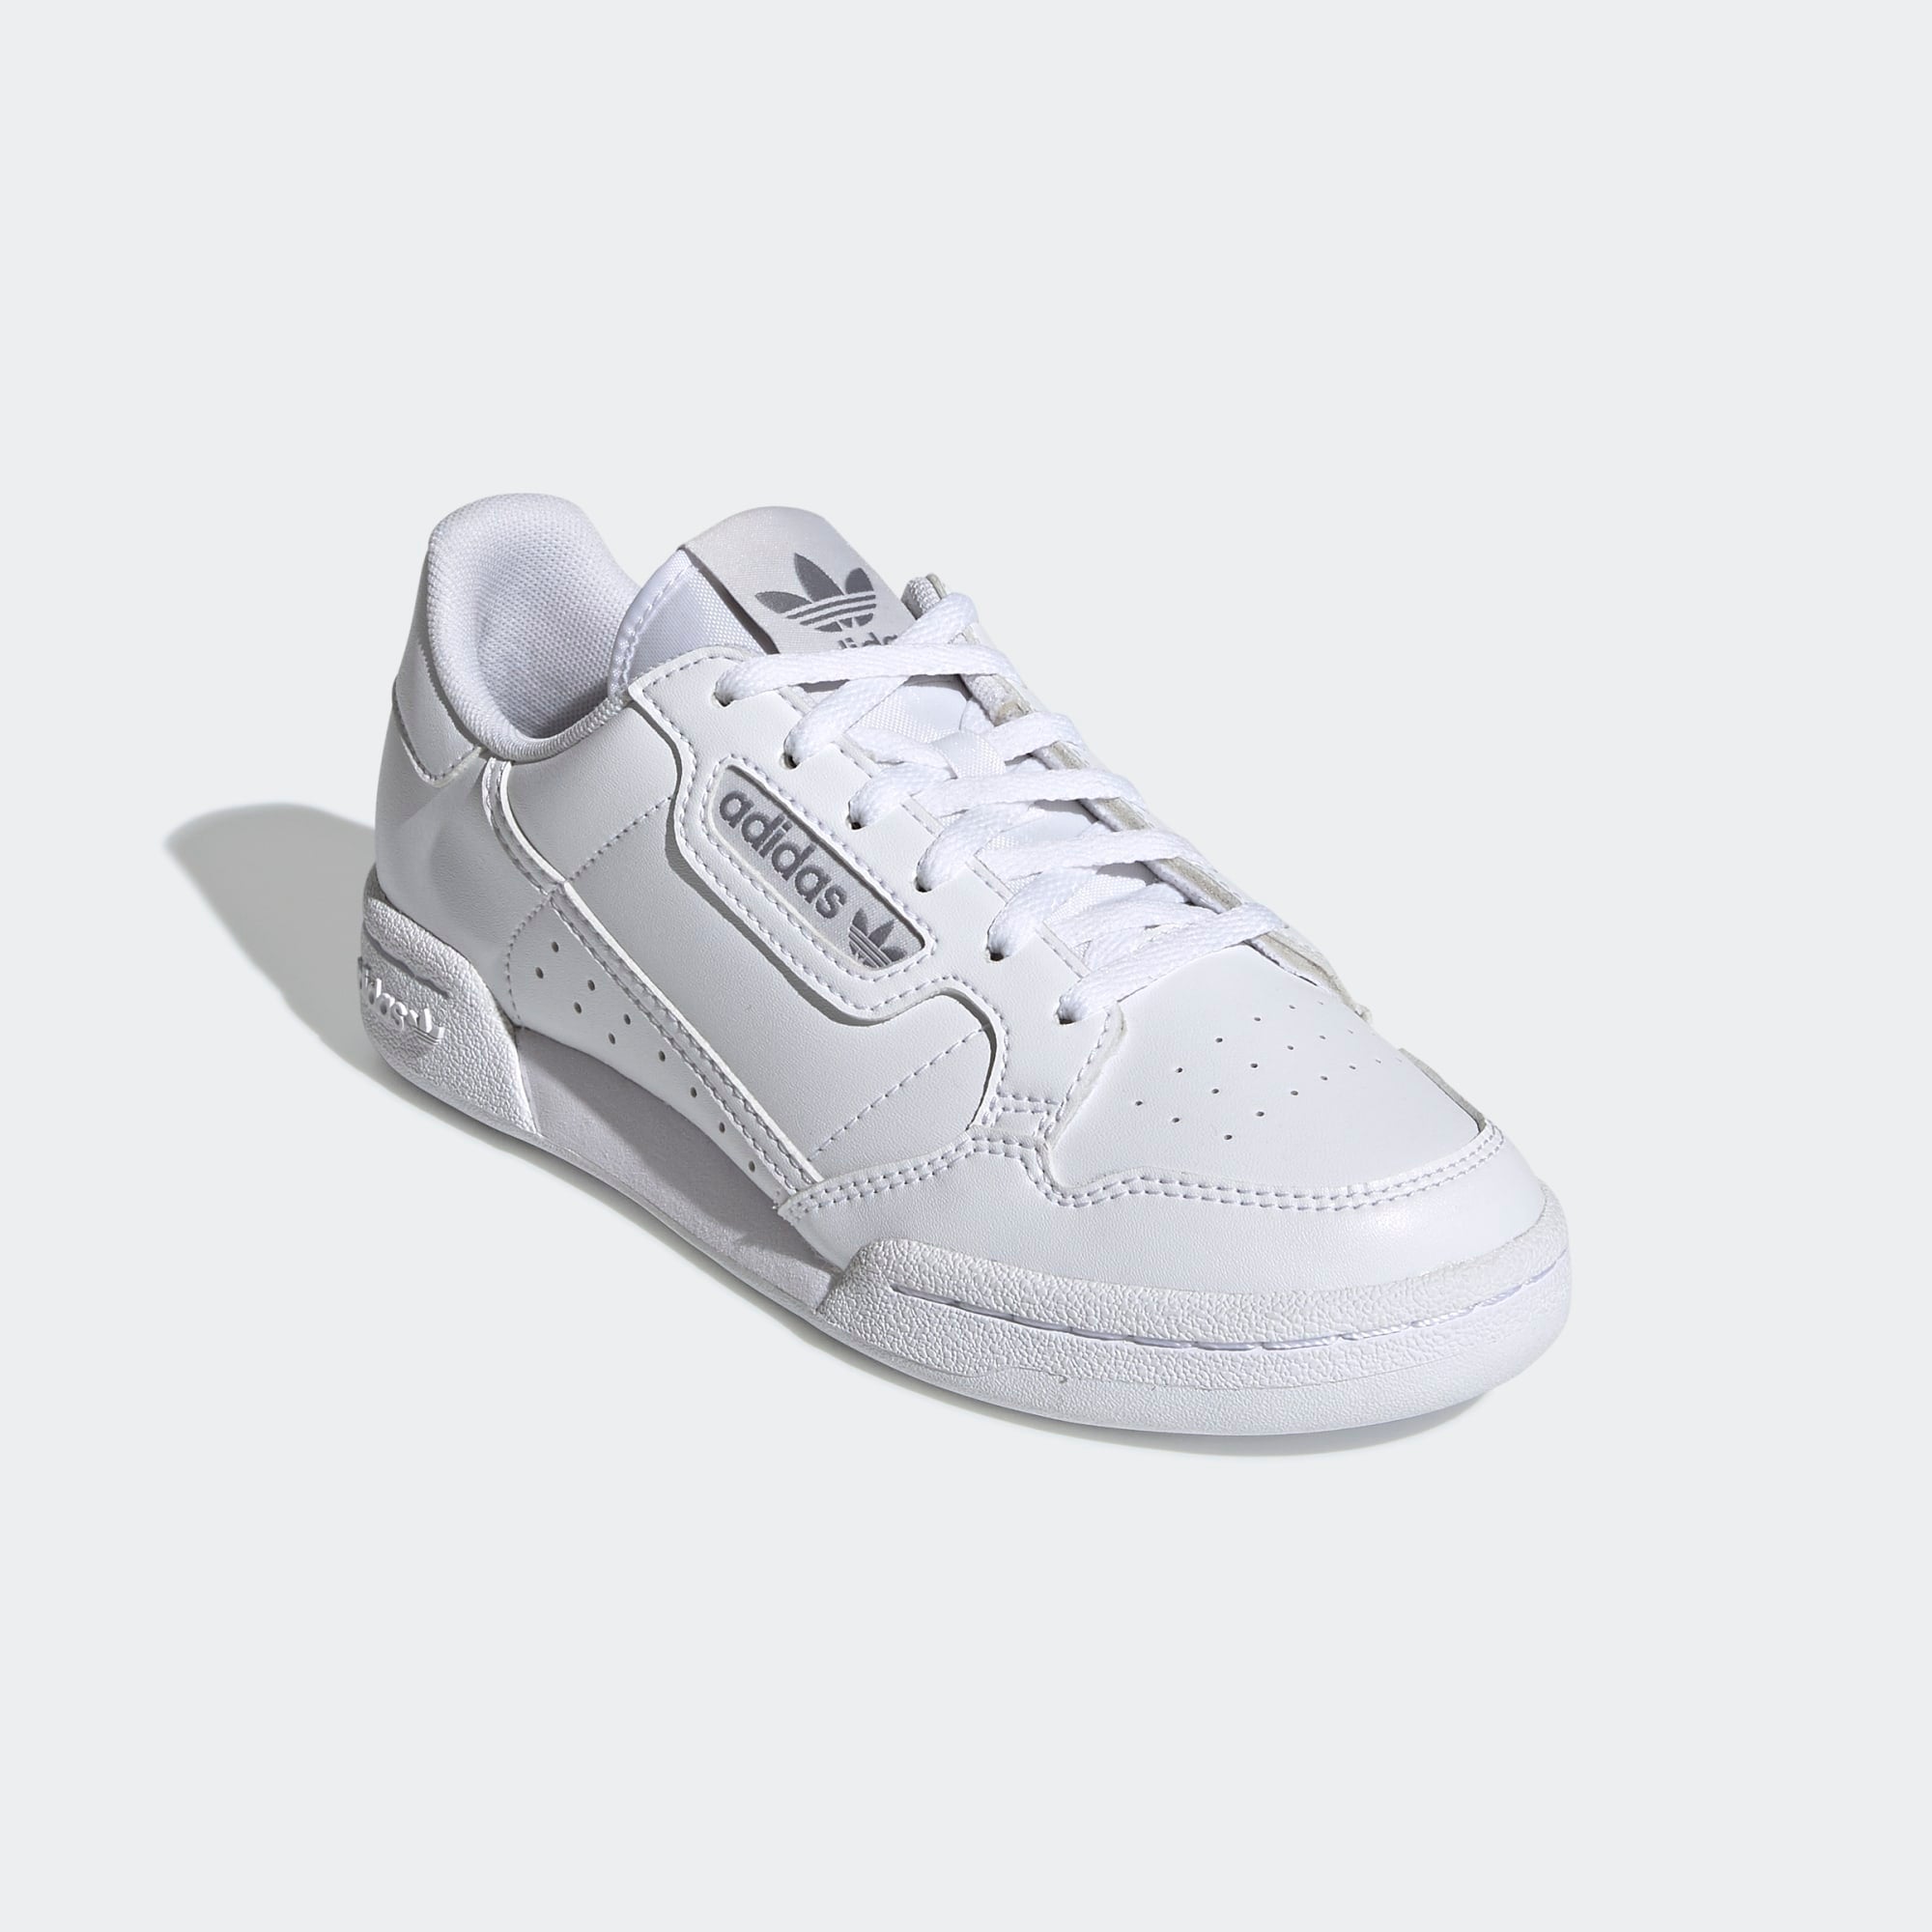 adidas continental 80 white and grey